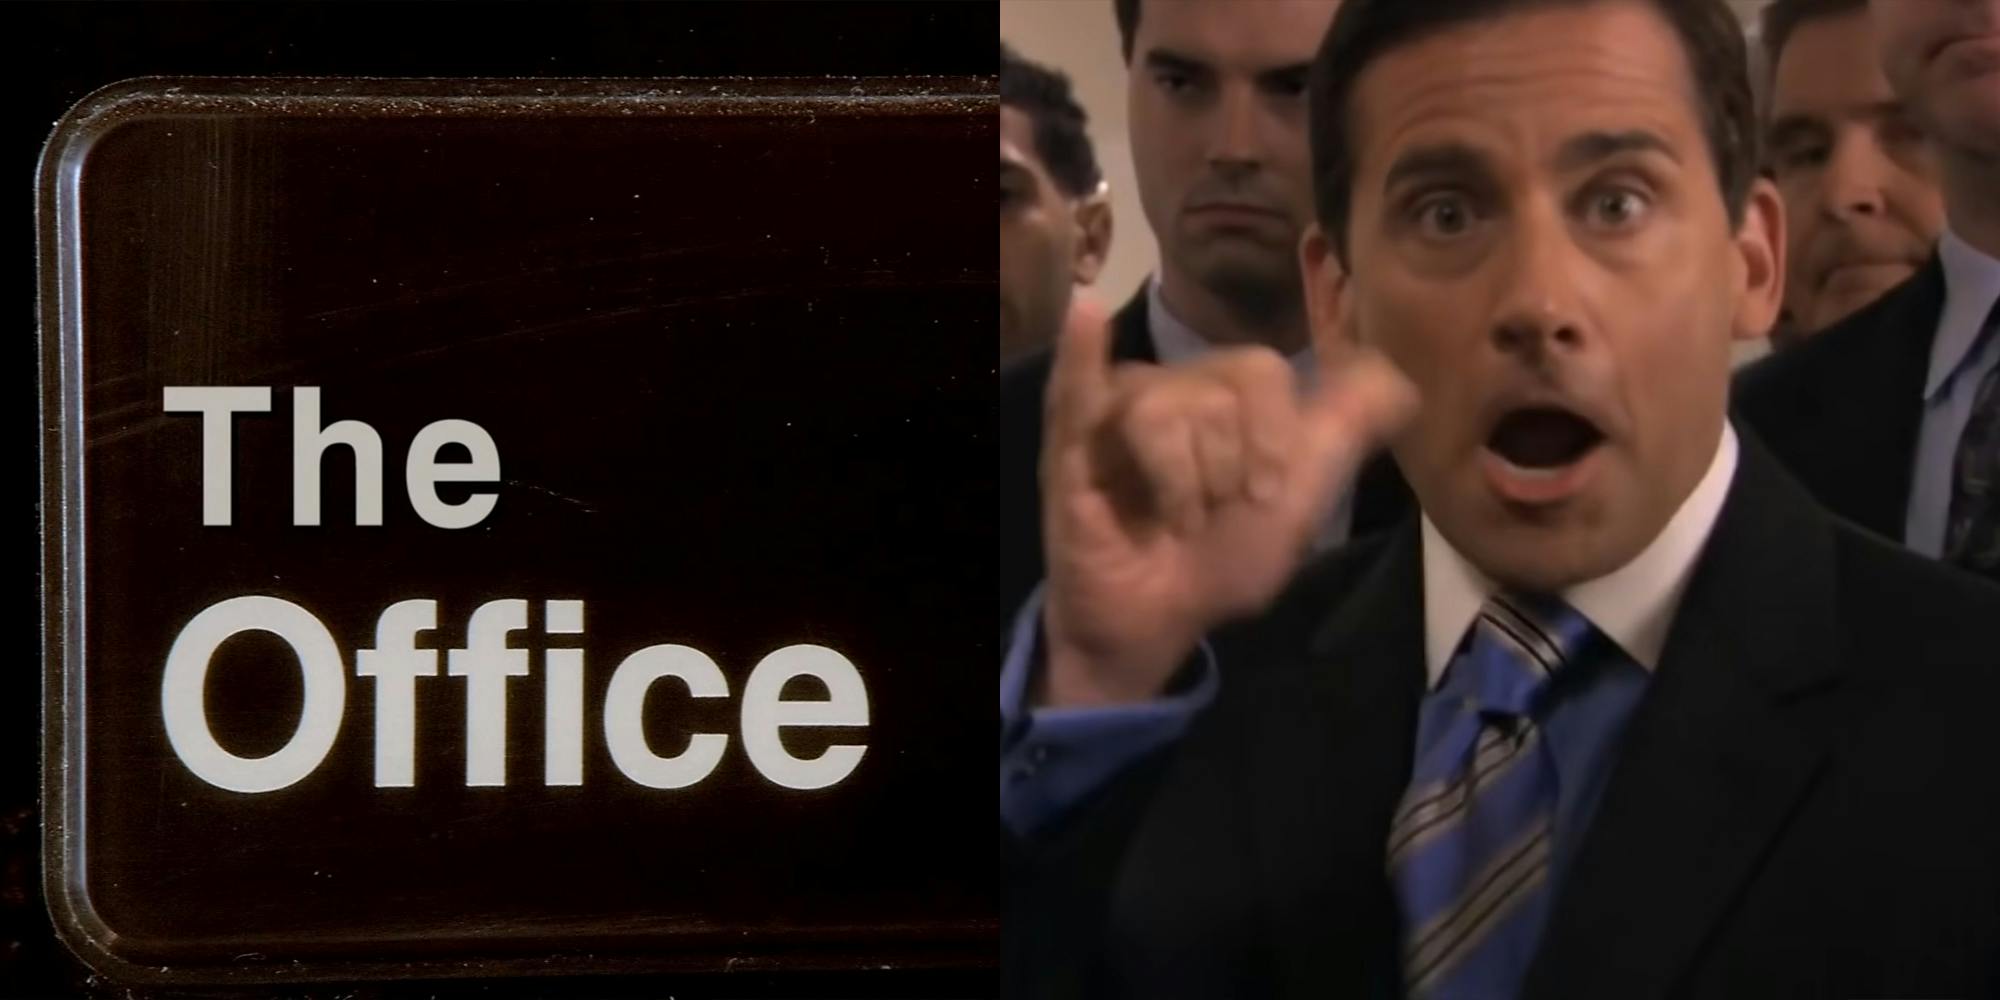 What's going on with ‘The Office’ reboot?